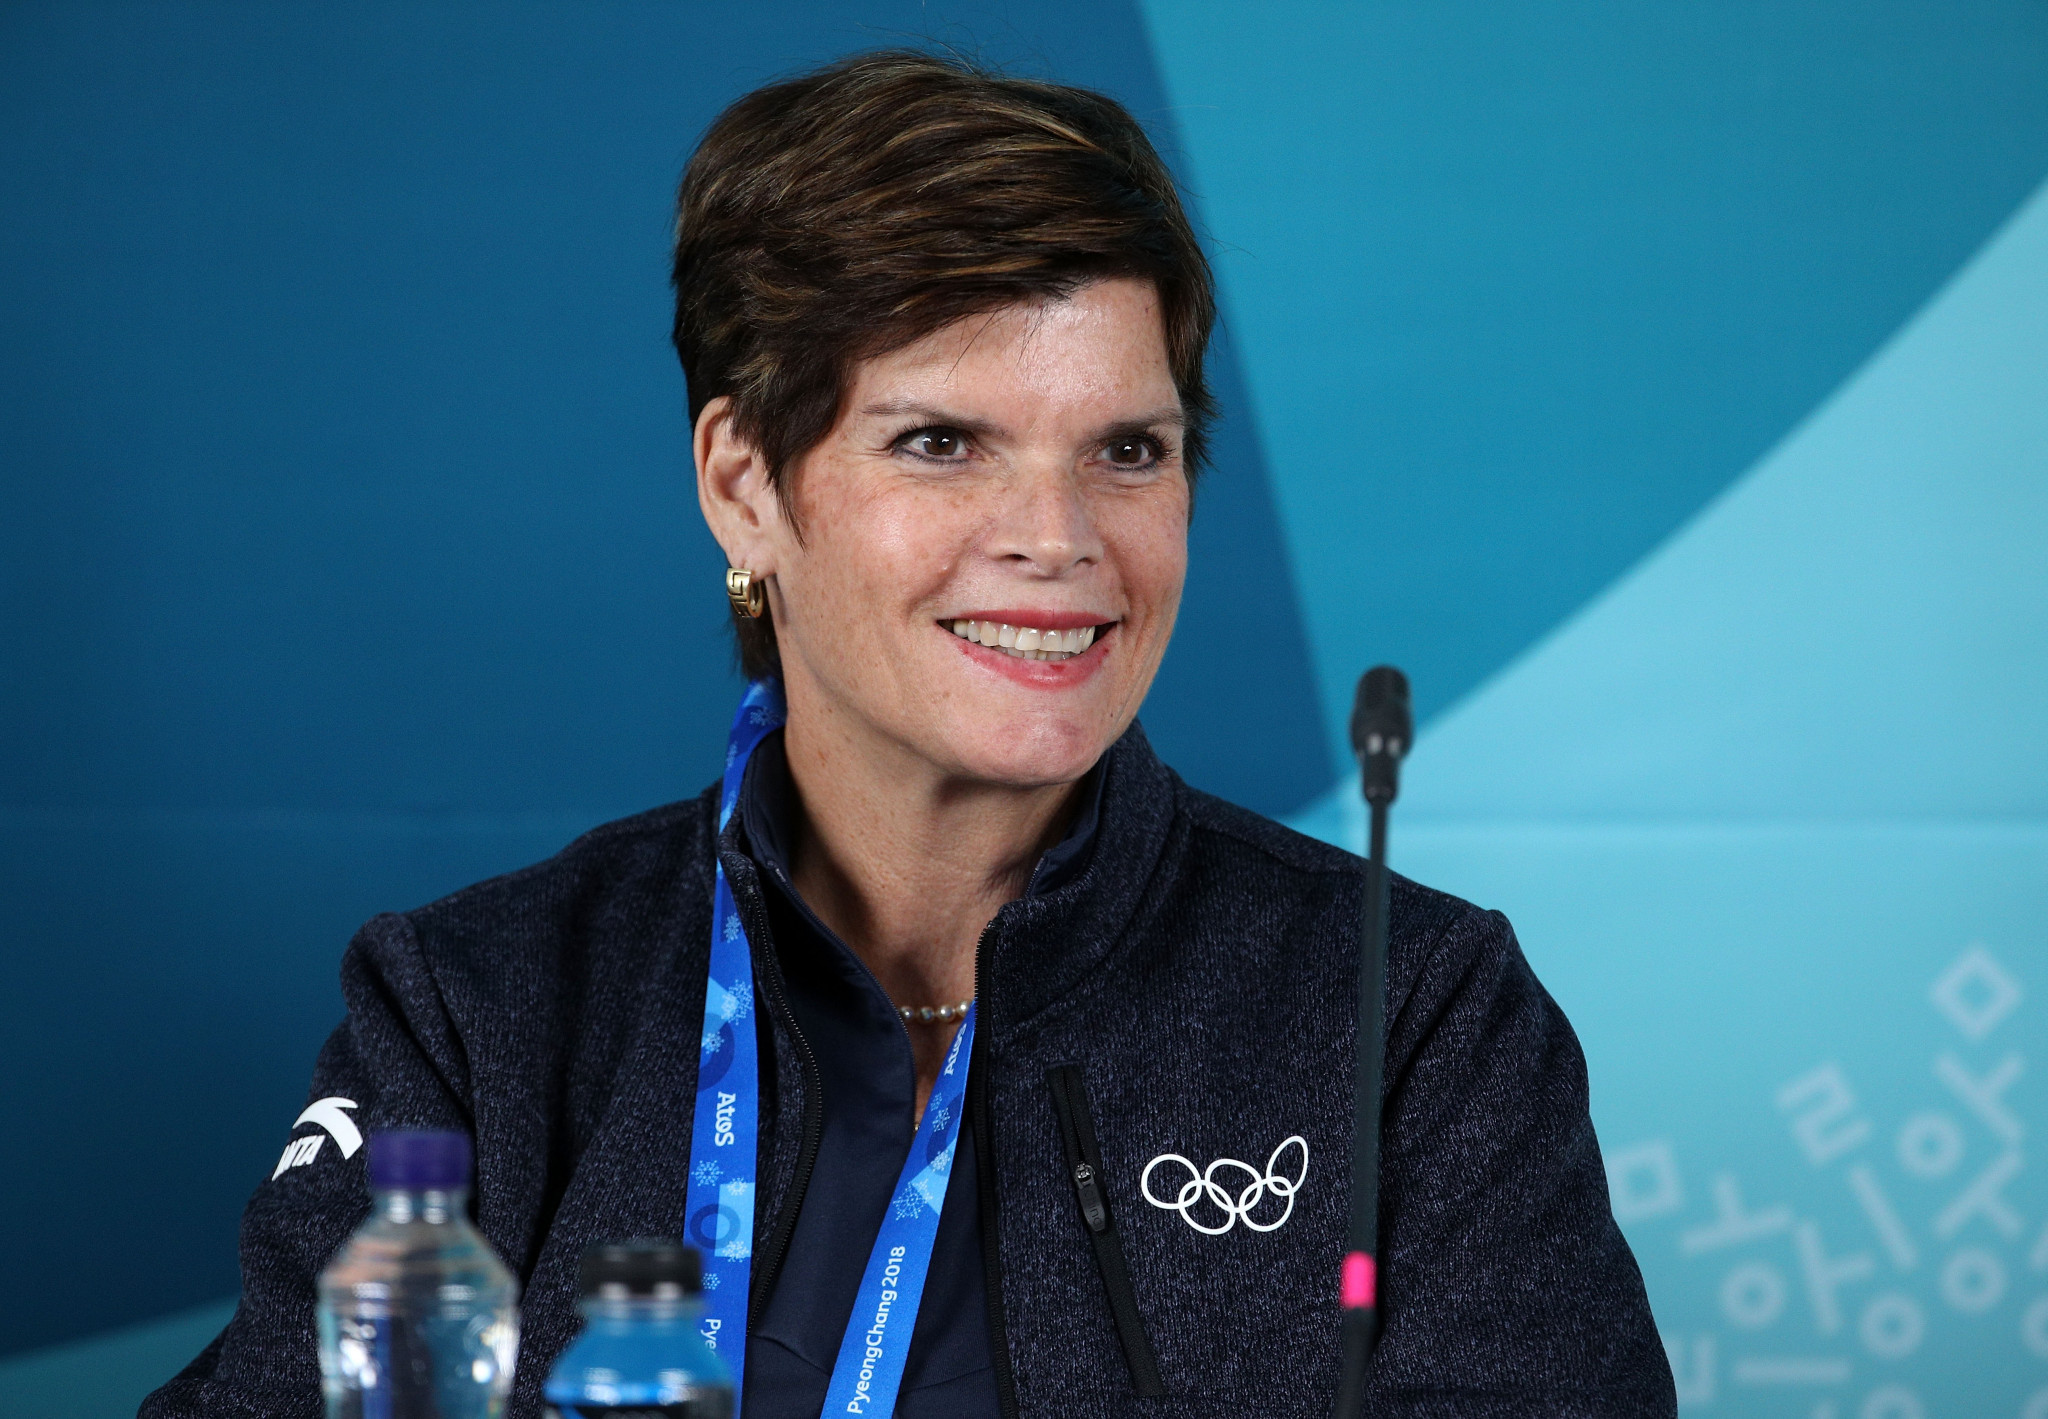 IOC Coordination Commission chair Nicole Hoevertsz said the IOC Coordination Commission was "very pleased and impressed with the progress" on Los Angeles 2028 ©Getty Images